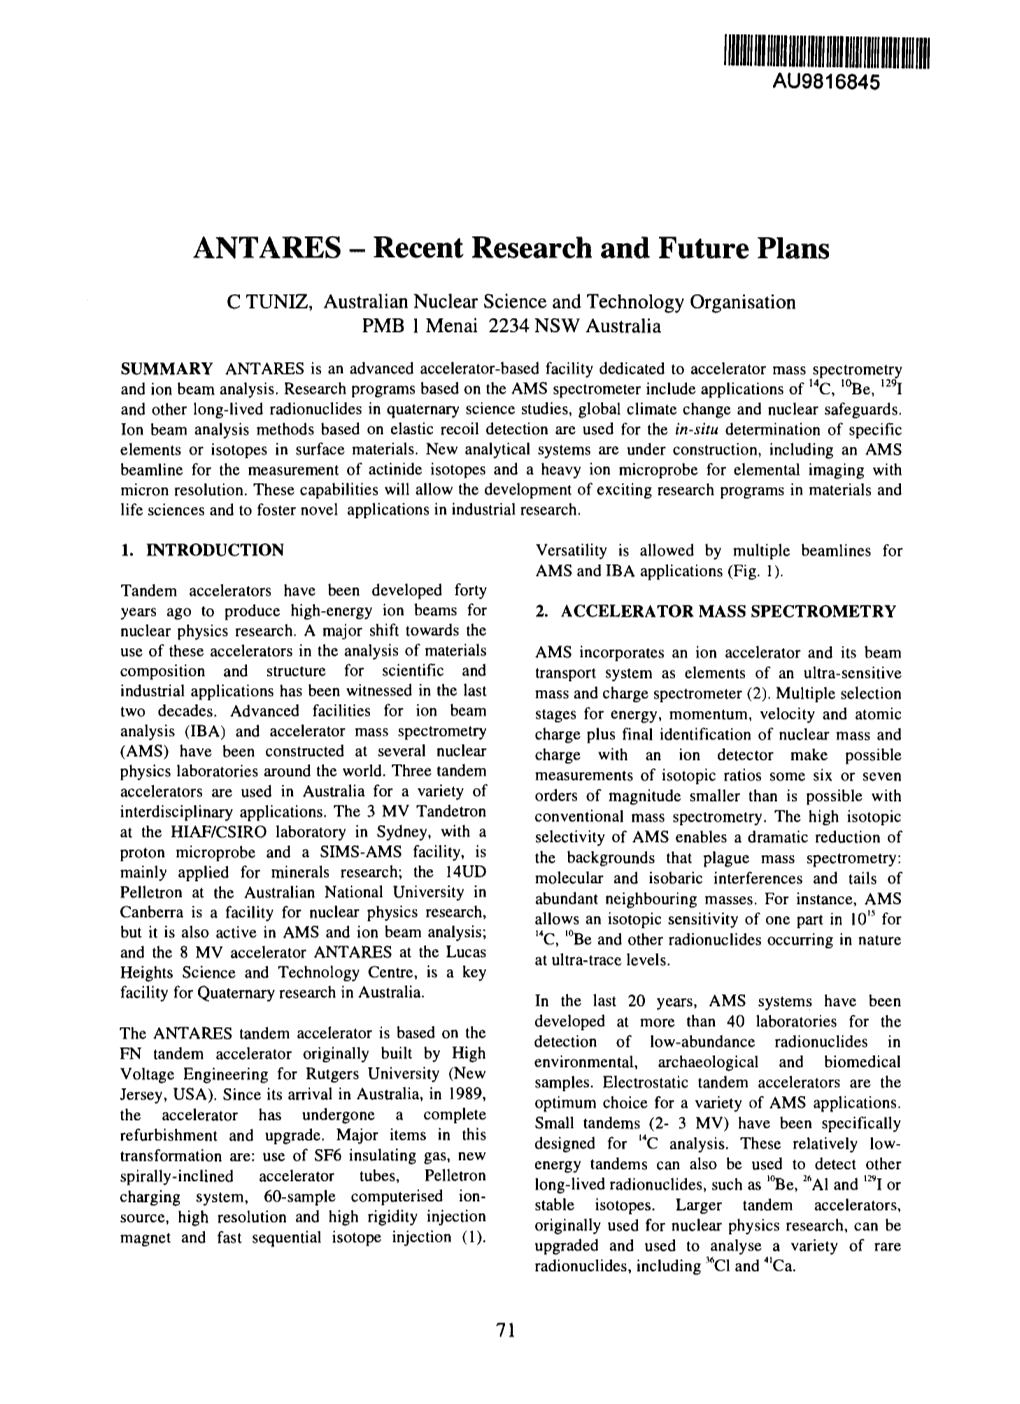 ANTARES - Recent Research and Future Plans